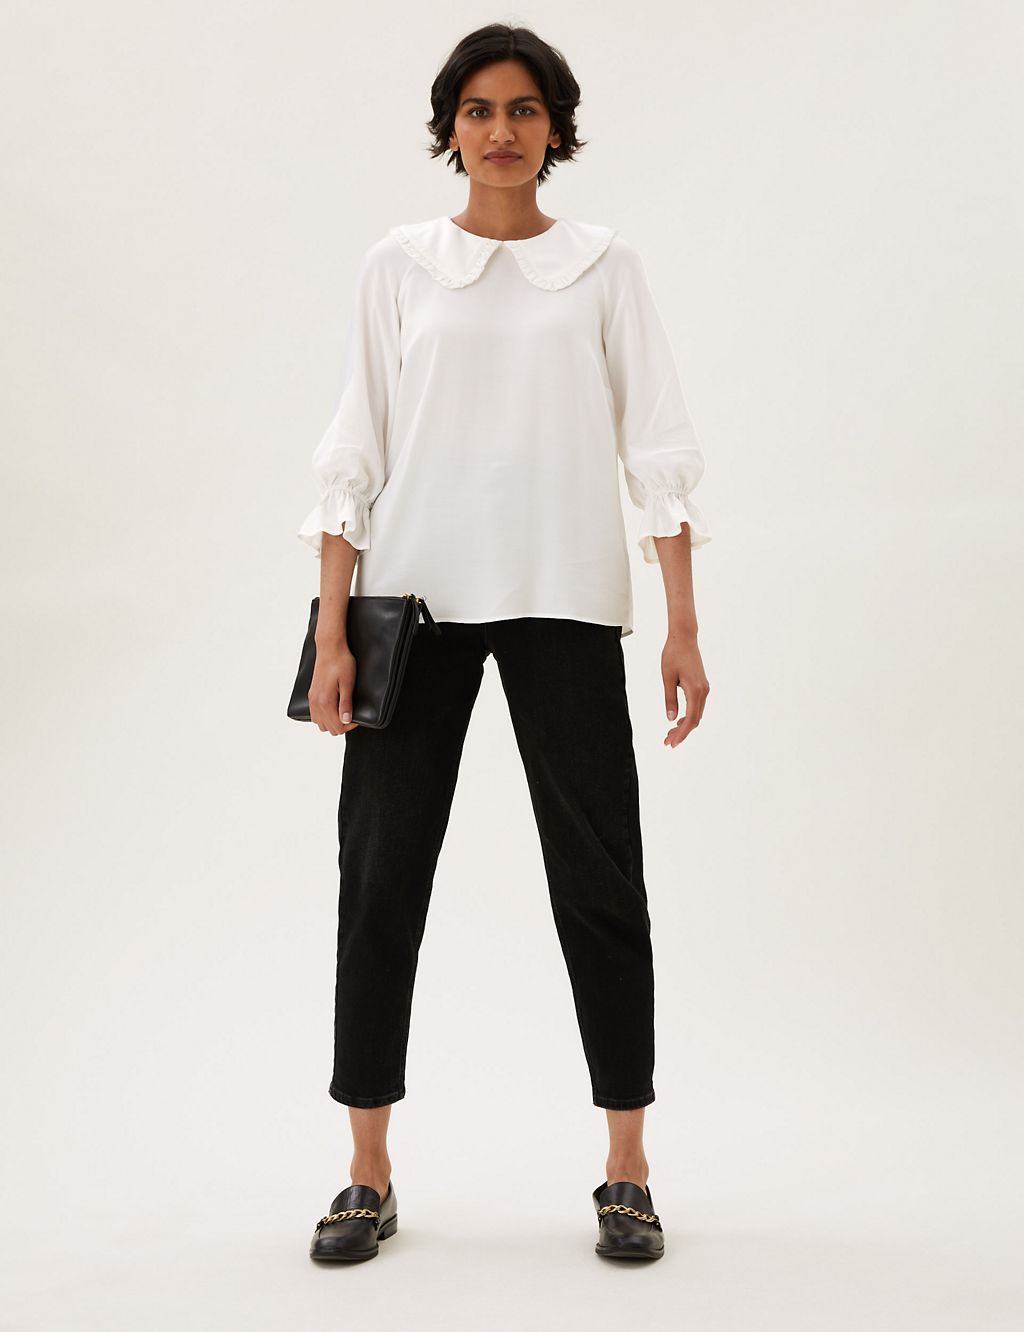 Collared Frill Detail Oversized Top | M&S Collection | M&S